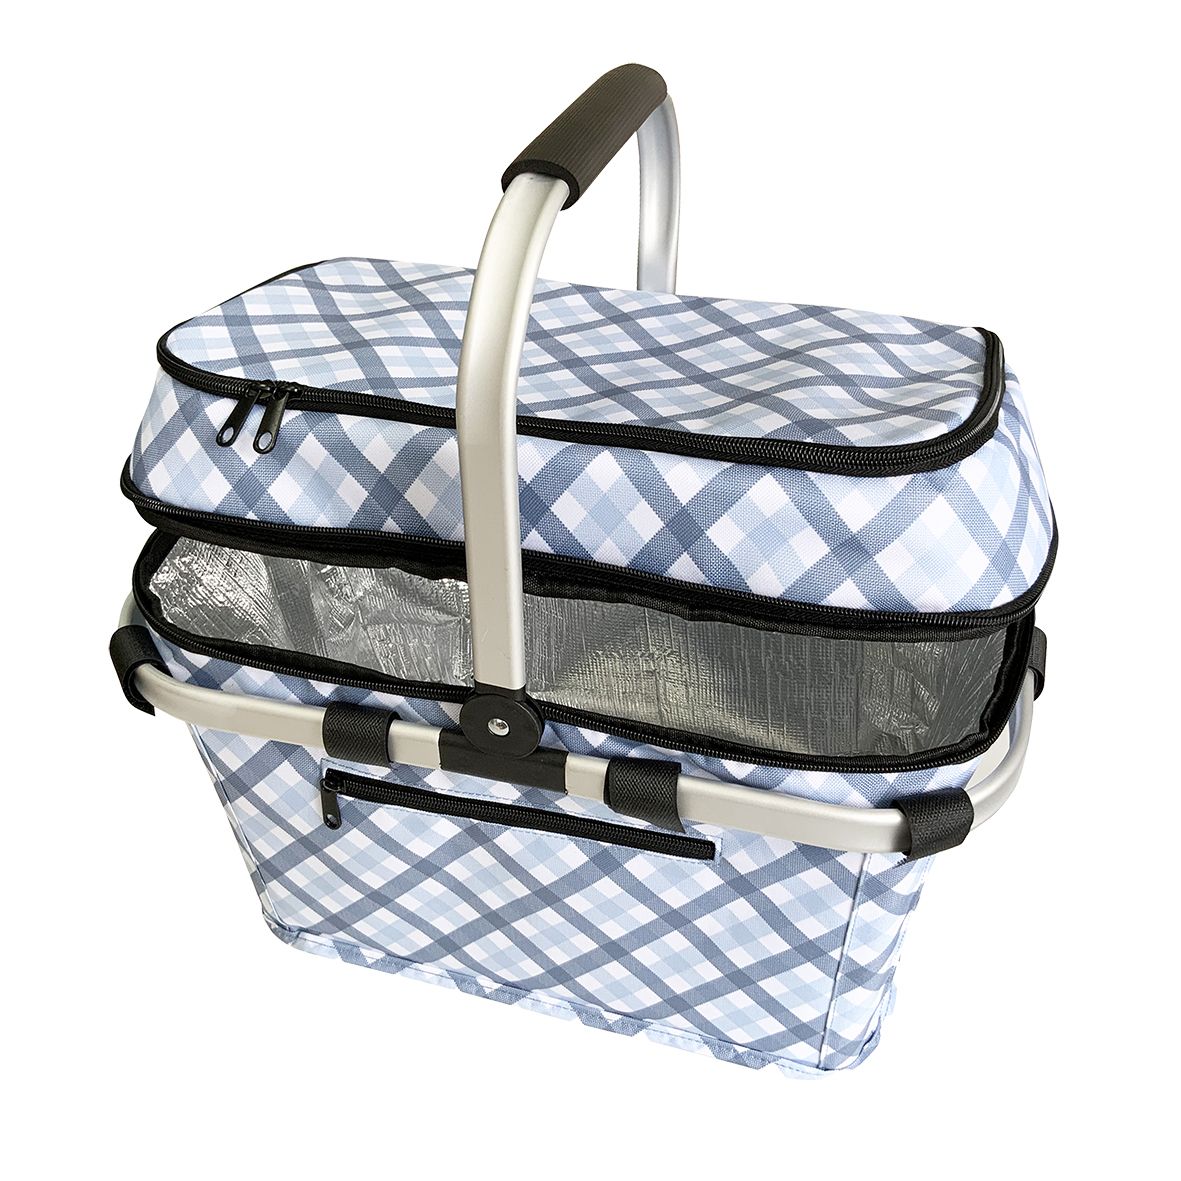 Insulated Picnic Basket - Gingham Blue/Grey